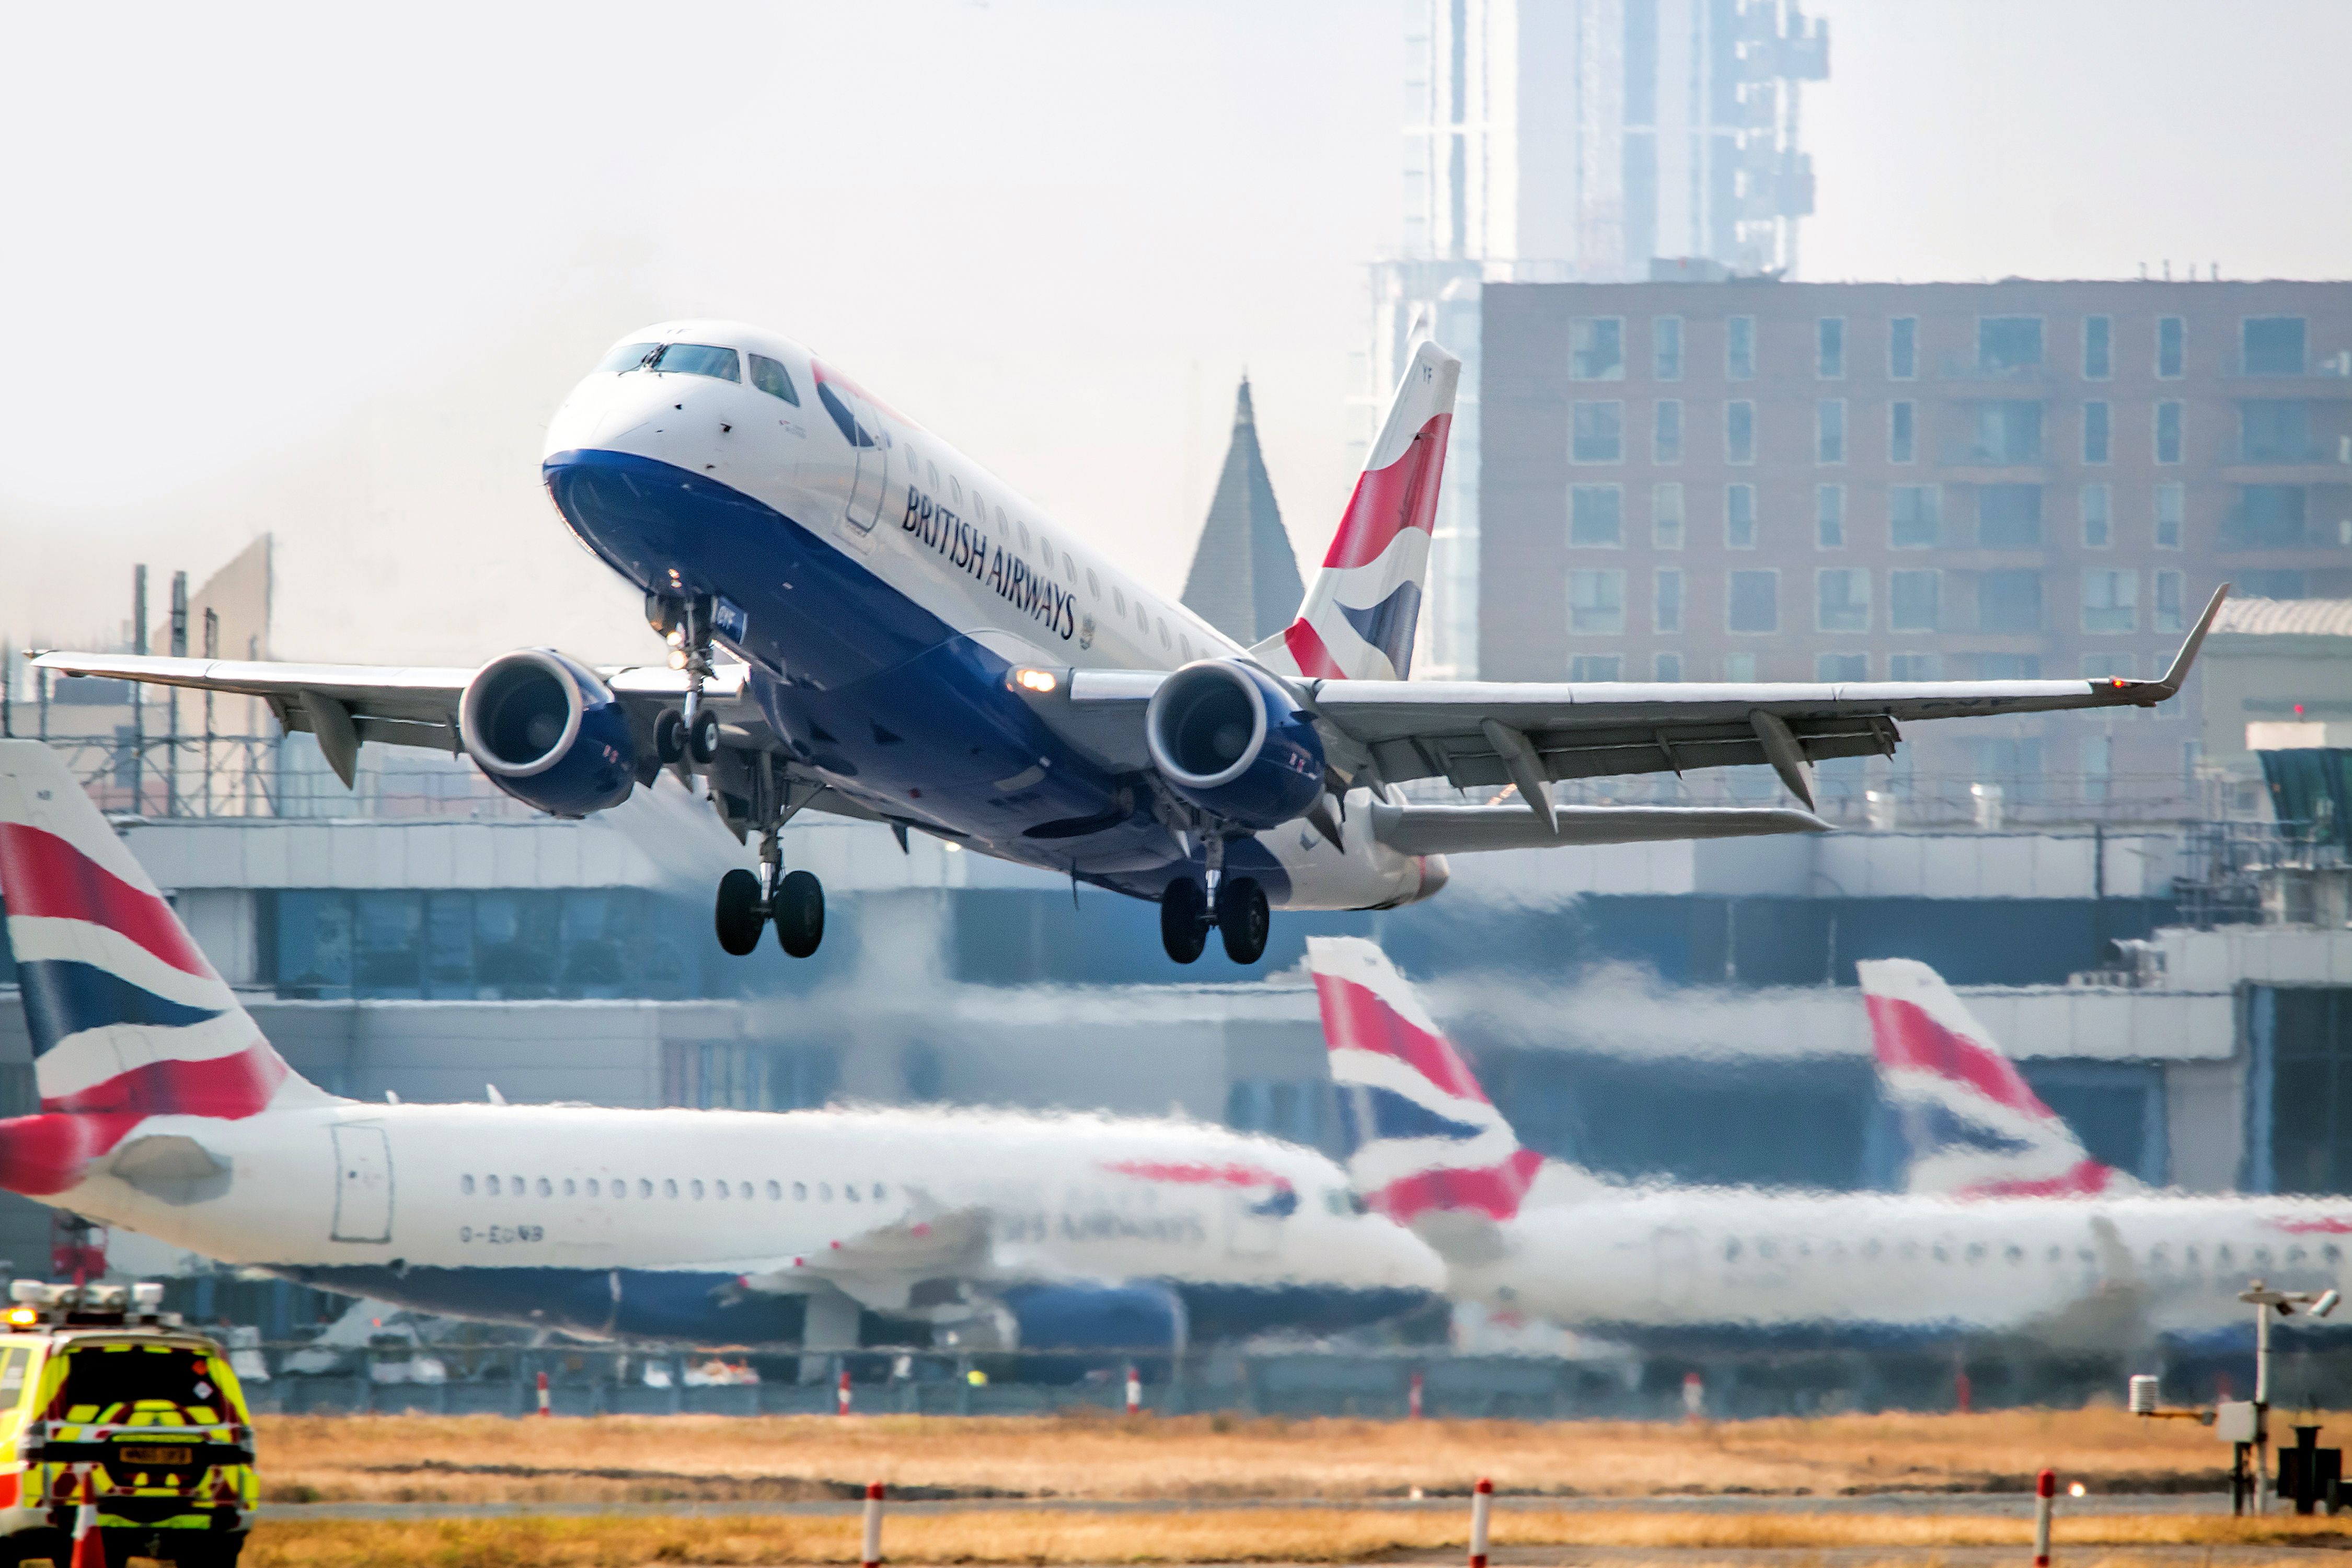 A British Airways aircraft taking off from London City Airport.